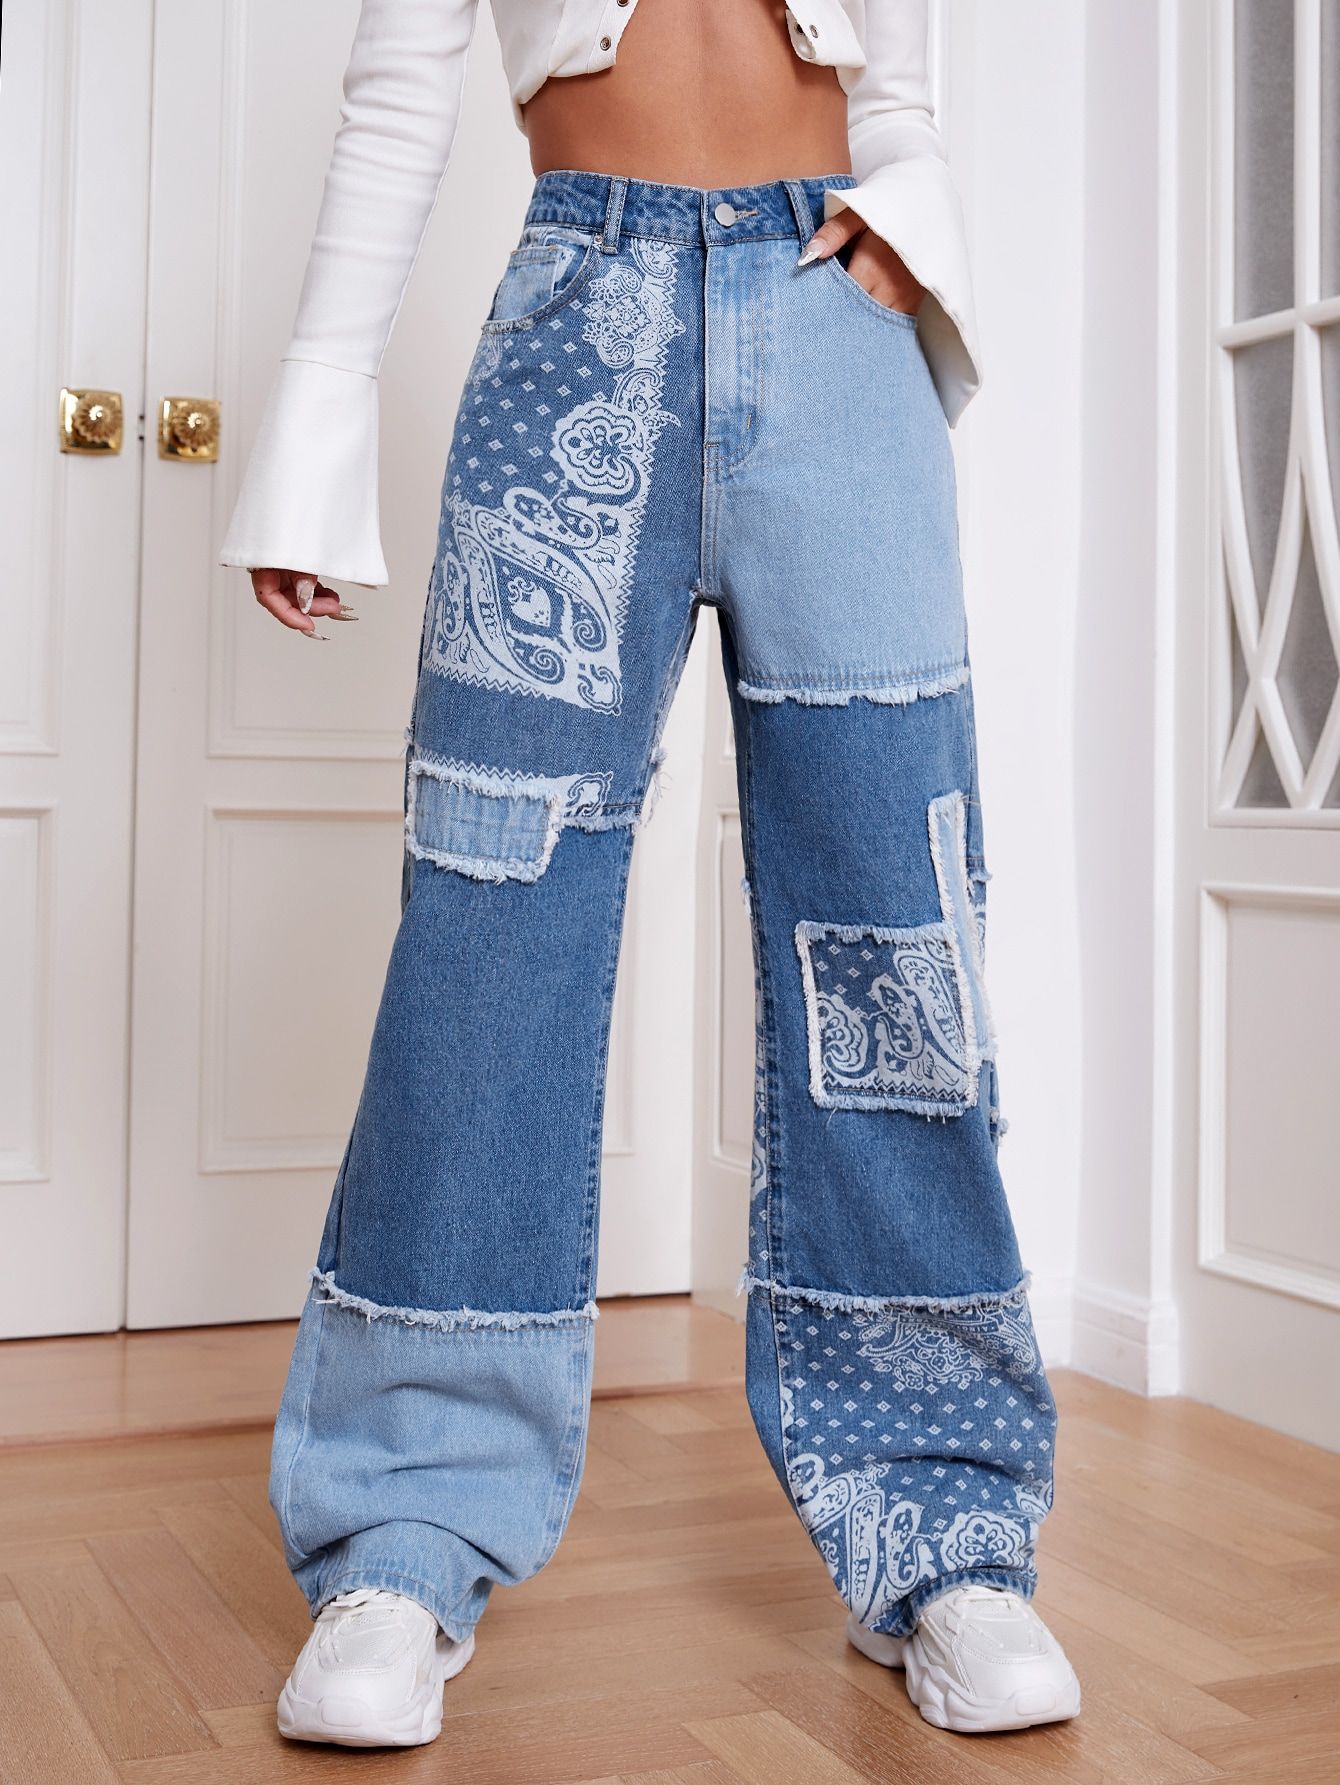 Boyfriend Style: Embrace Relaxed Vibes with Boyfriend Jeans